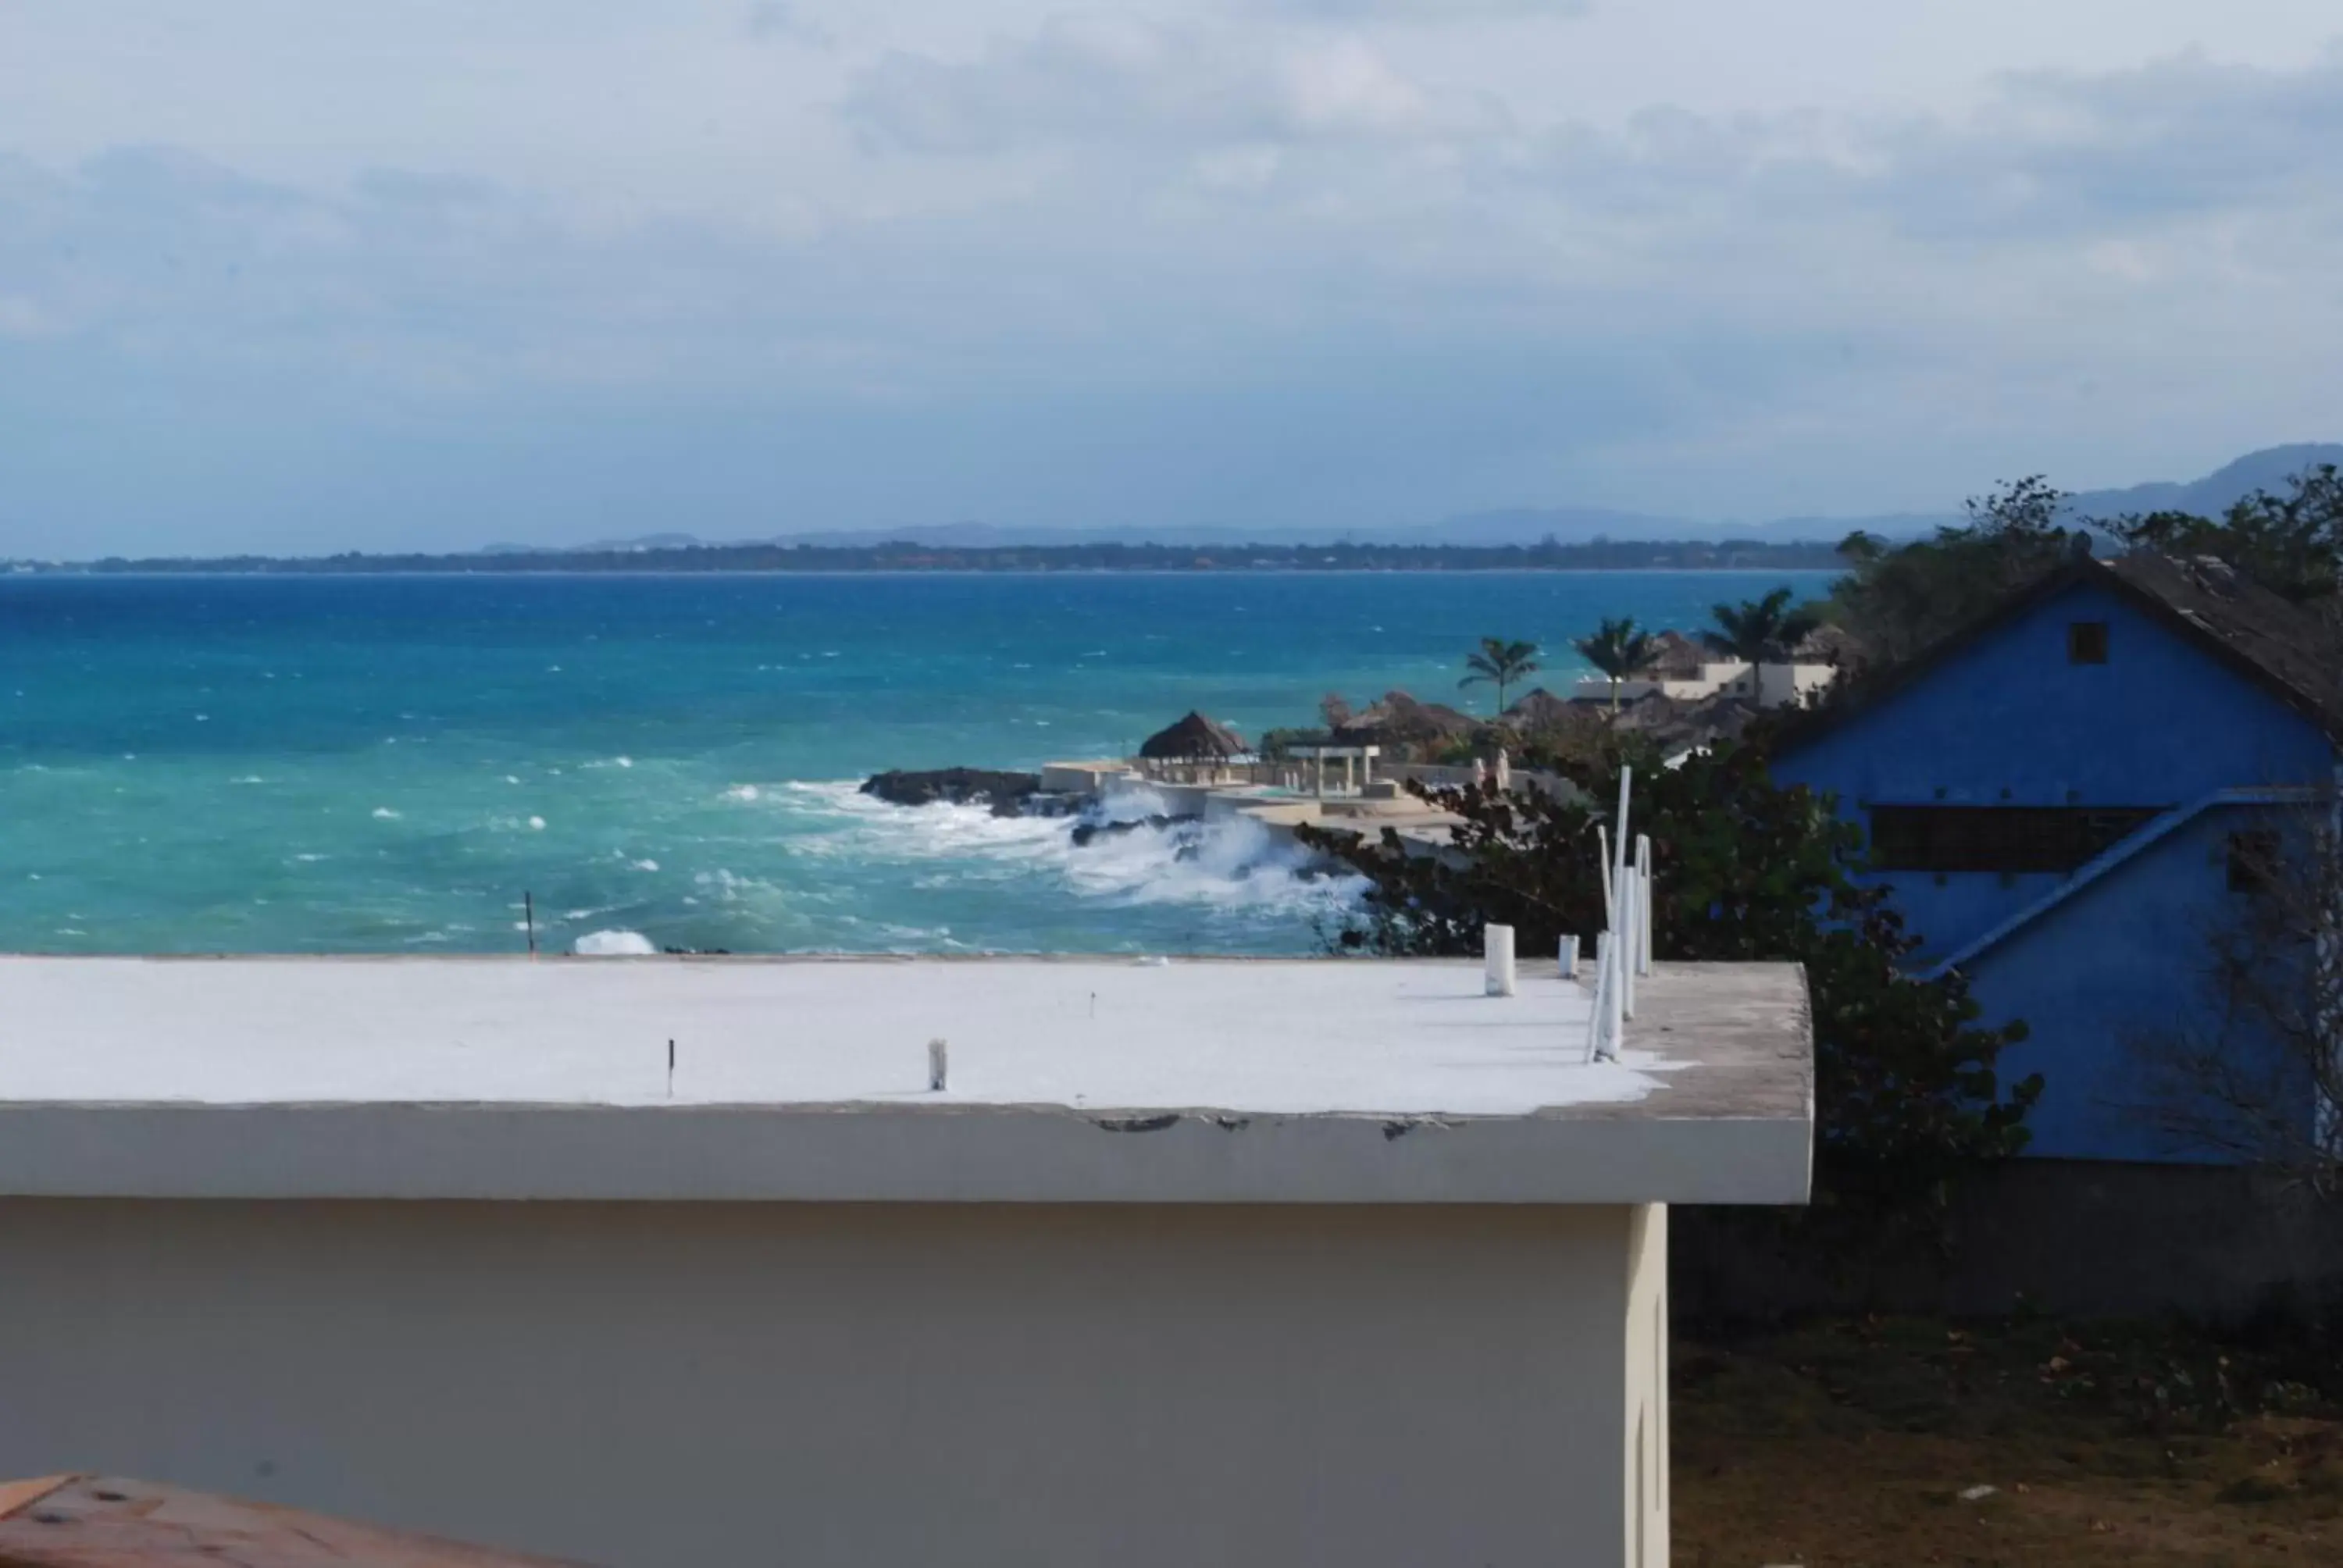 Sea View in Home Sweet Home Resort